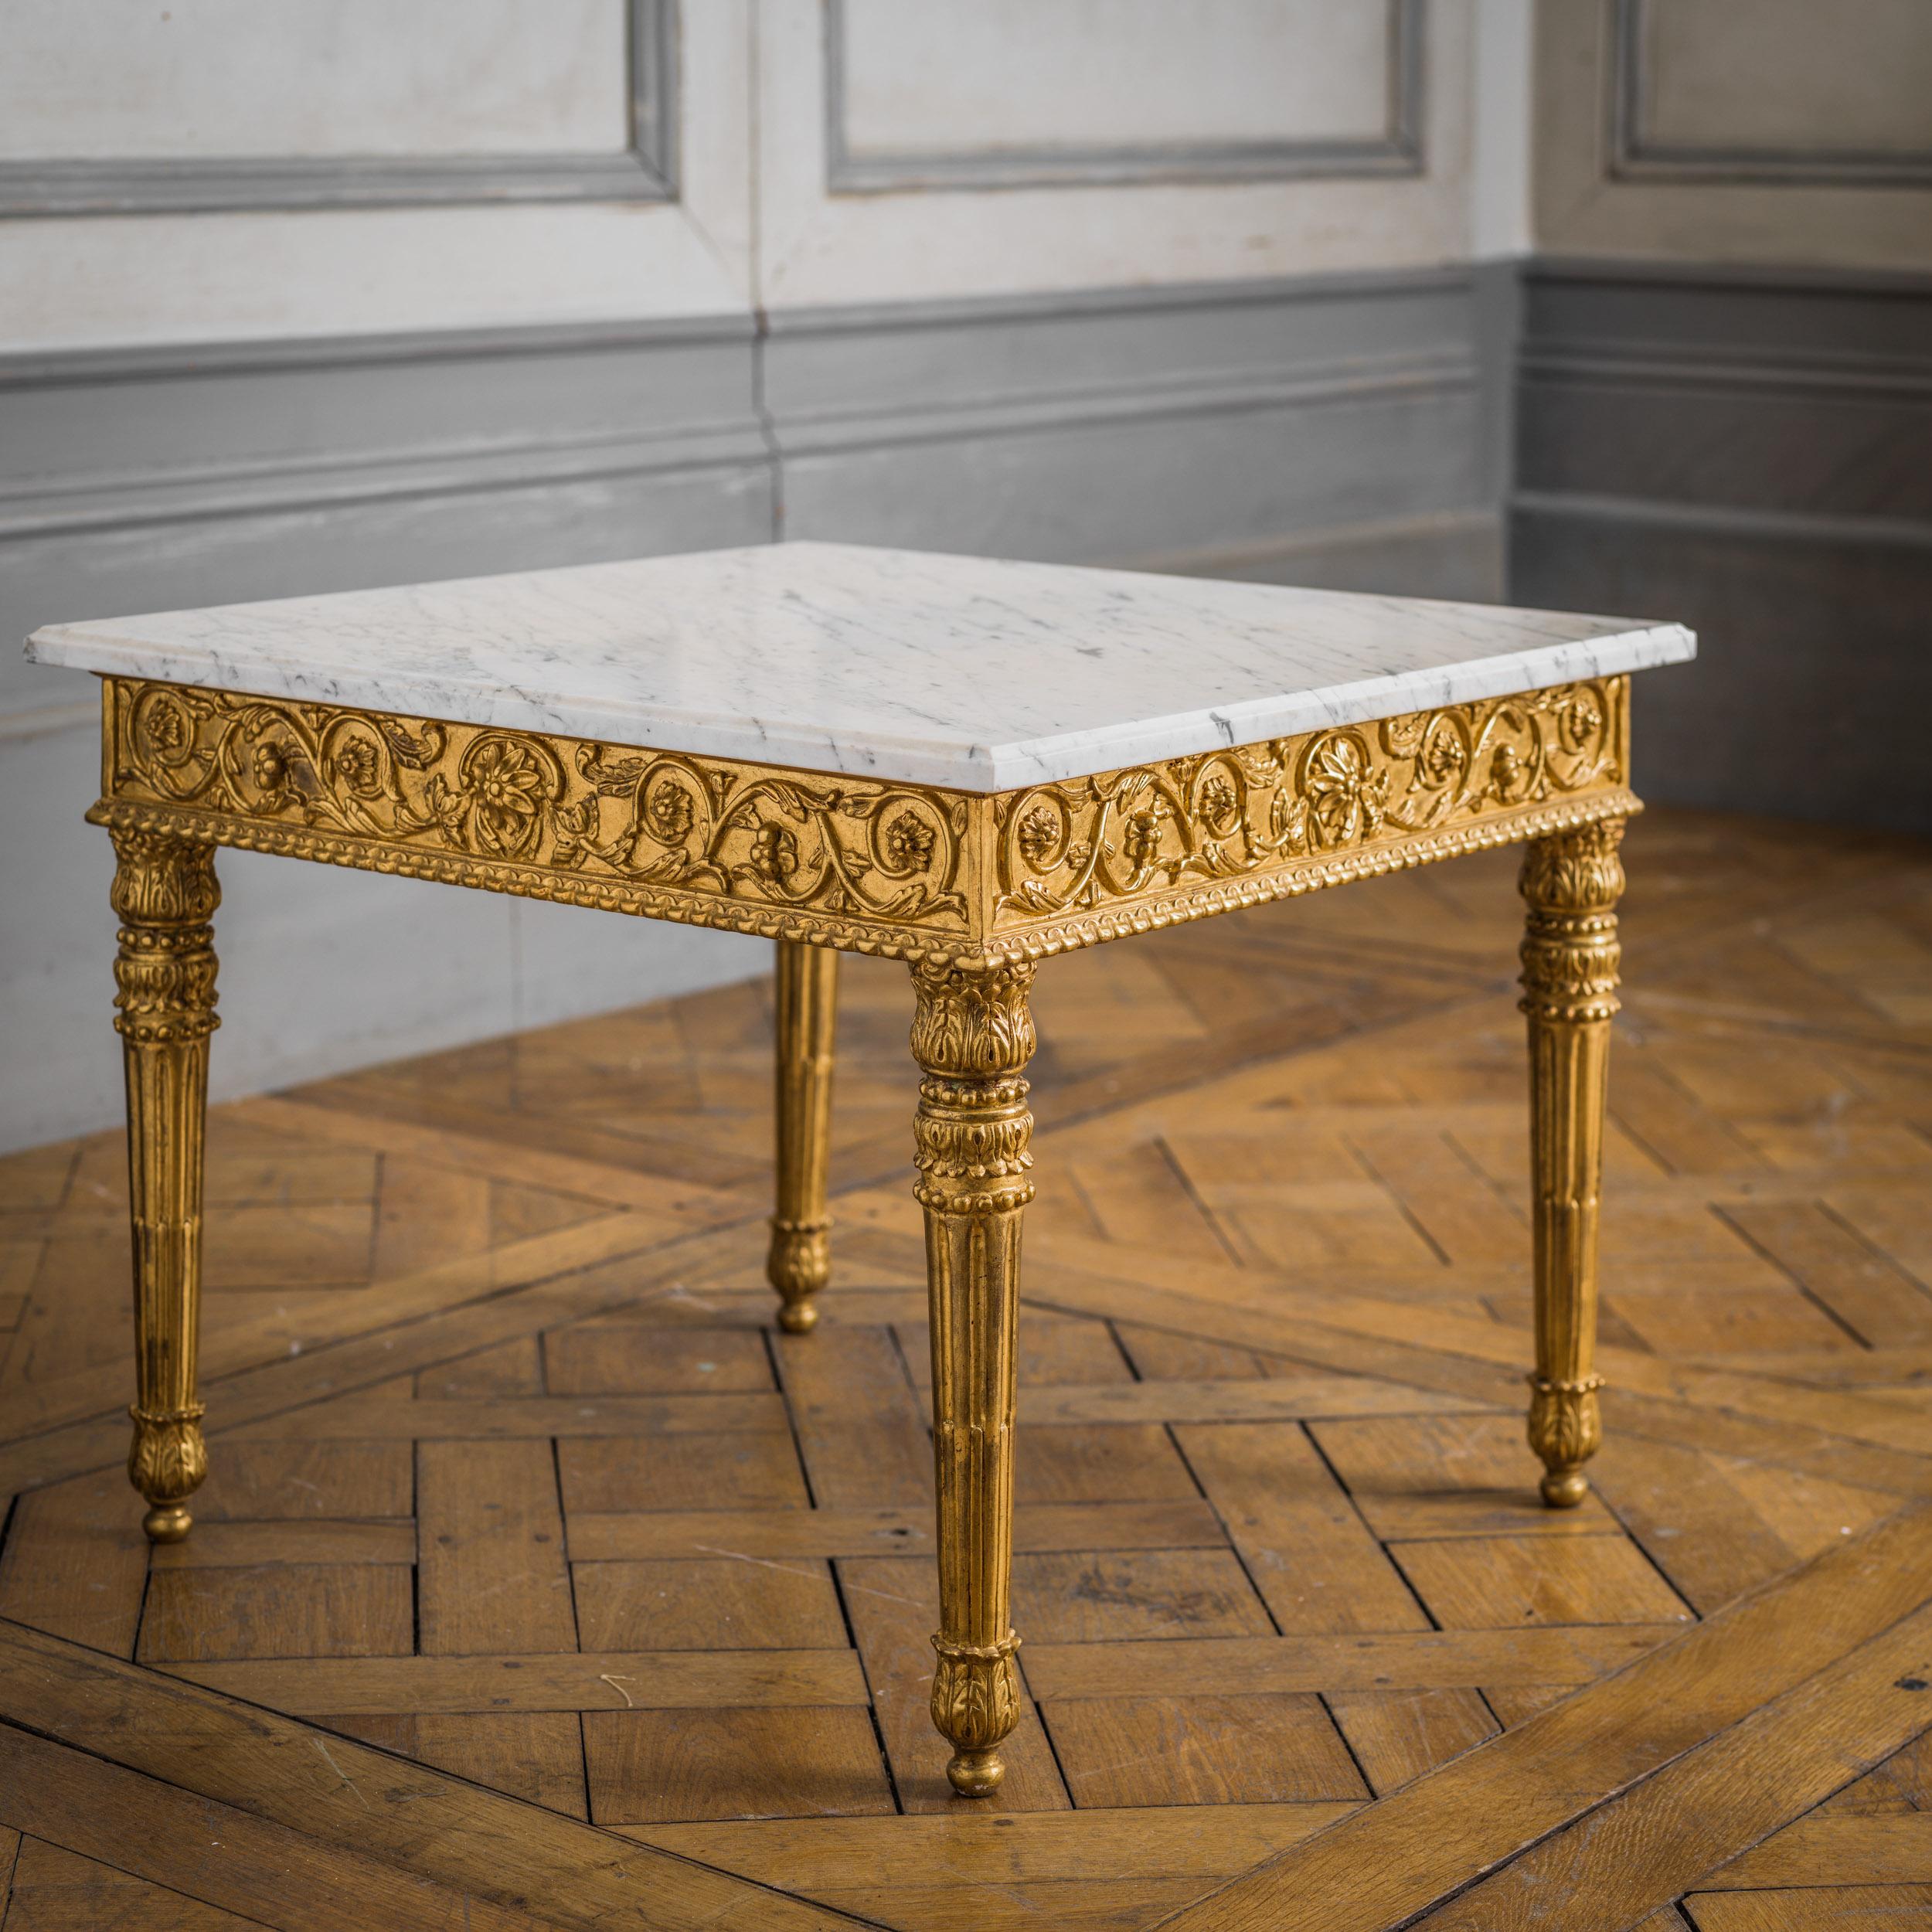 A beautifully crafted, hand carved Louis XVI style coffee table featuring fine detailing. Finished in an antiqued, hand gilded patina with a beveled Carrara marble top. Other sizes available. Made by master furniture makers - La Maison